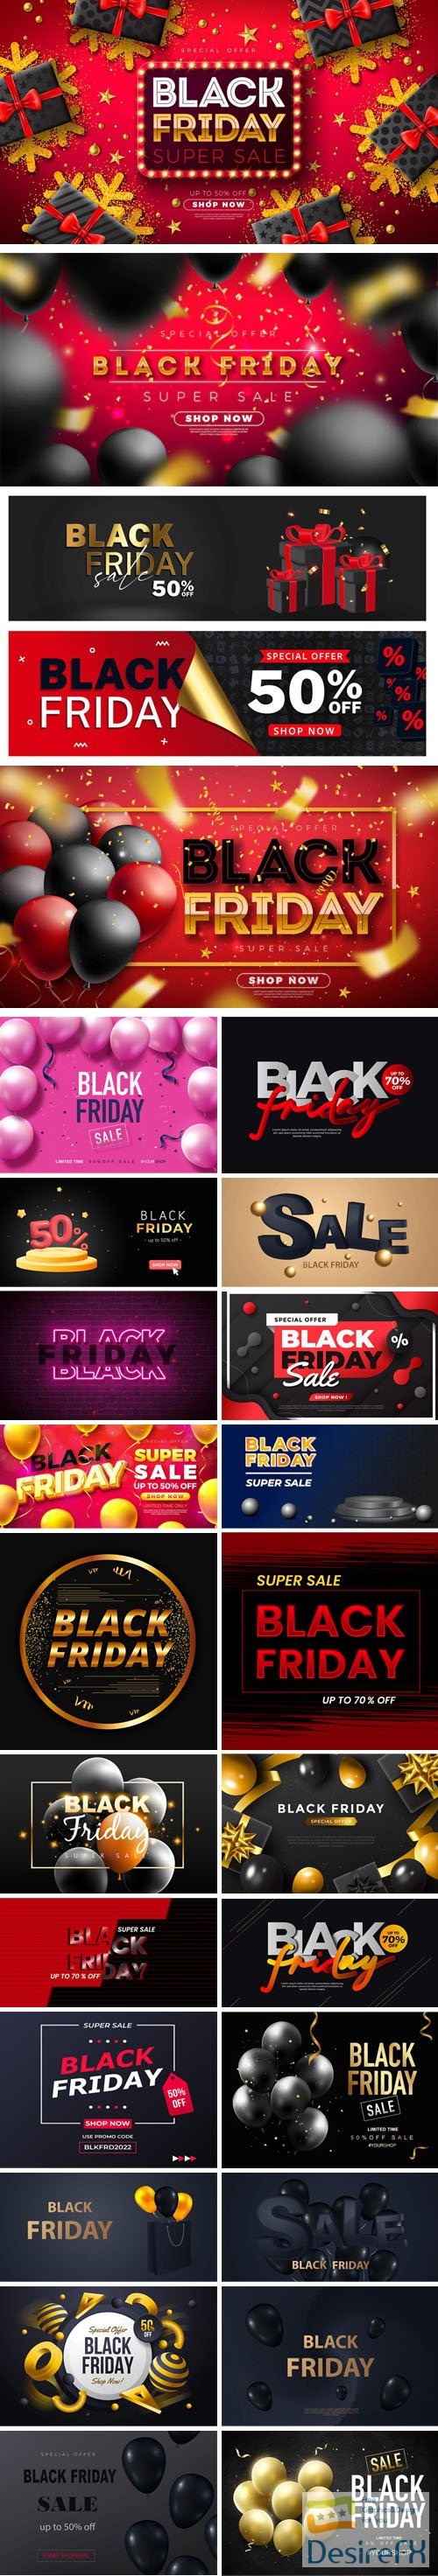 Black Friday - 20+ Web Banners & Backgrounds Vector Templates Vol.5